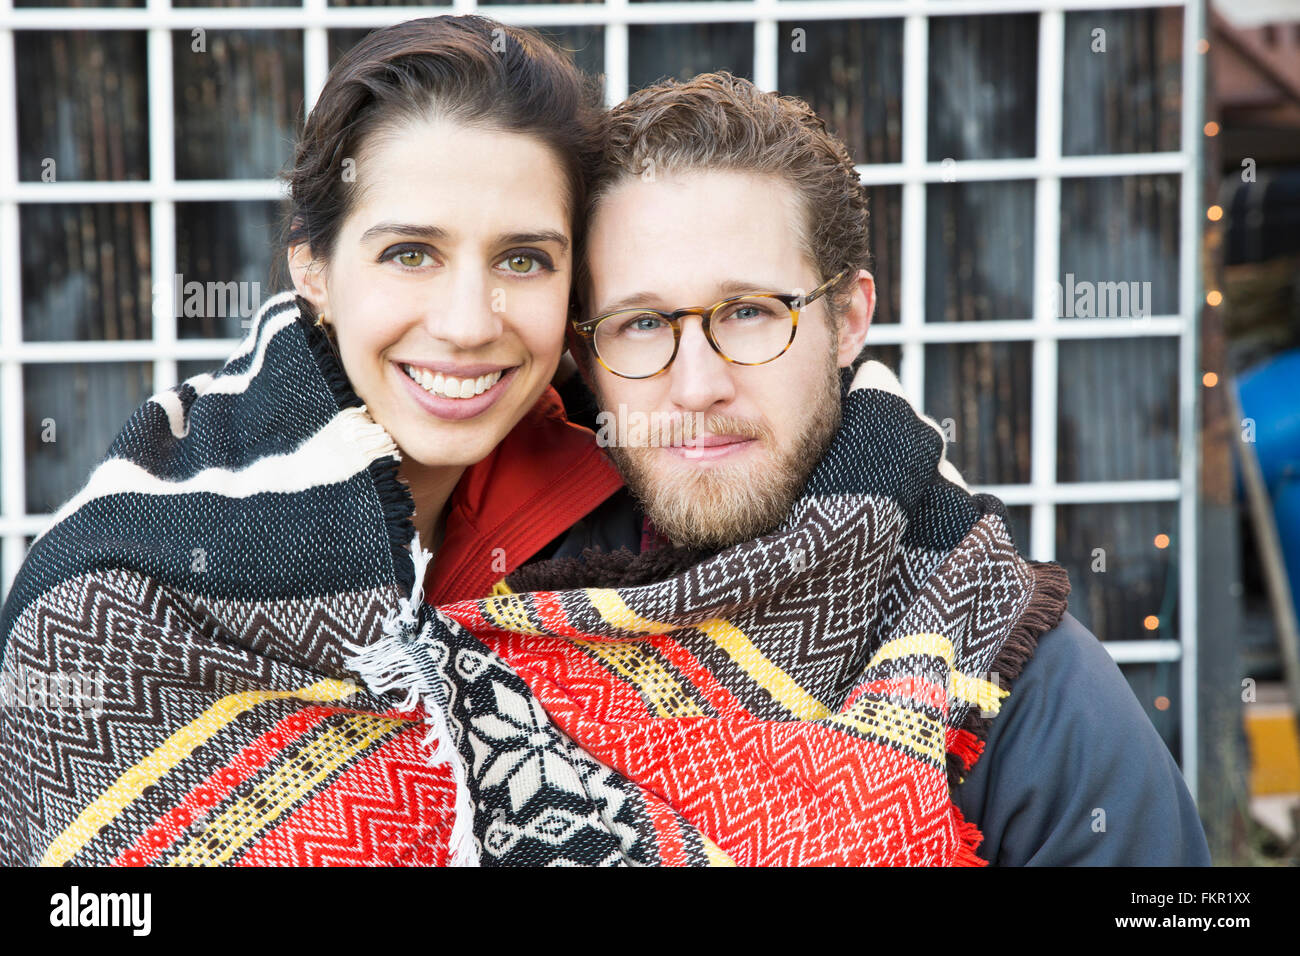 Couple wrapped in blanket outdoors Stock Photo